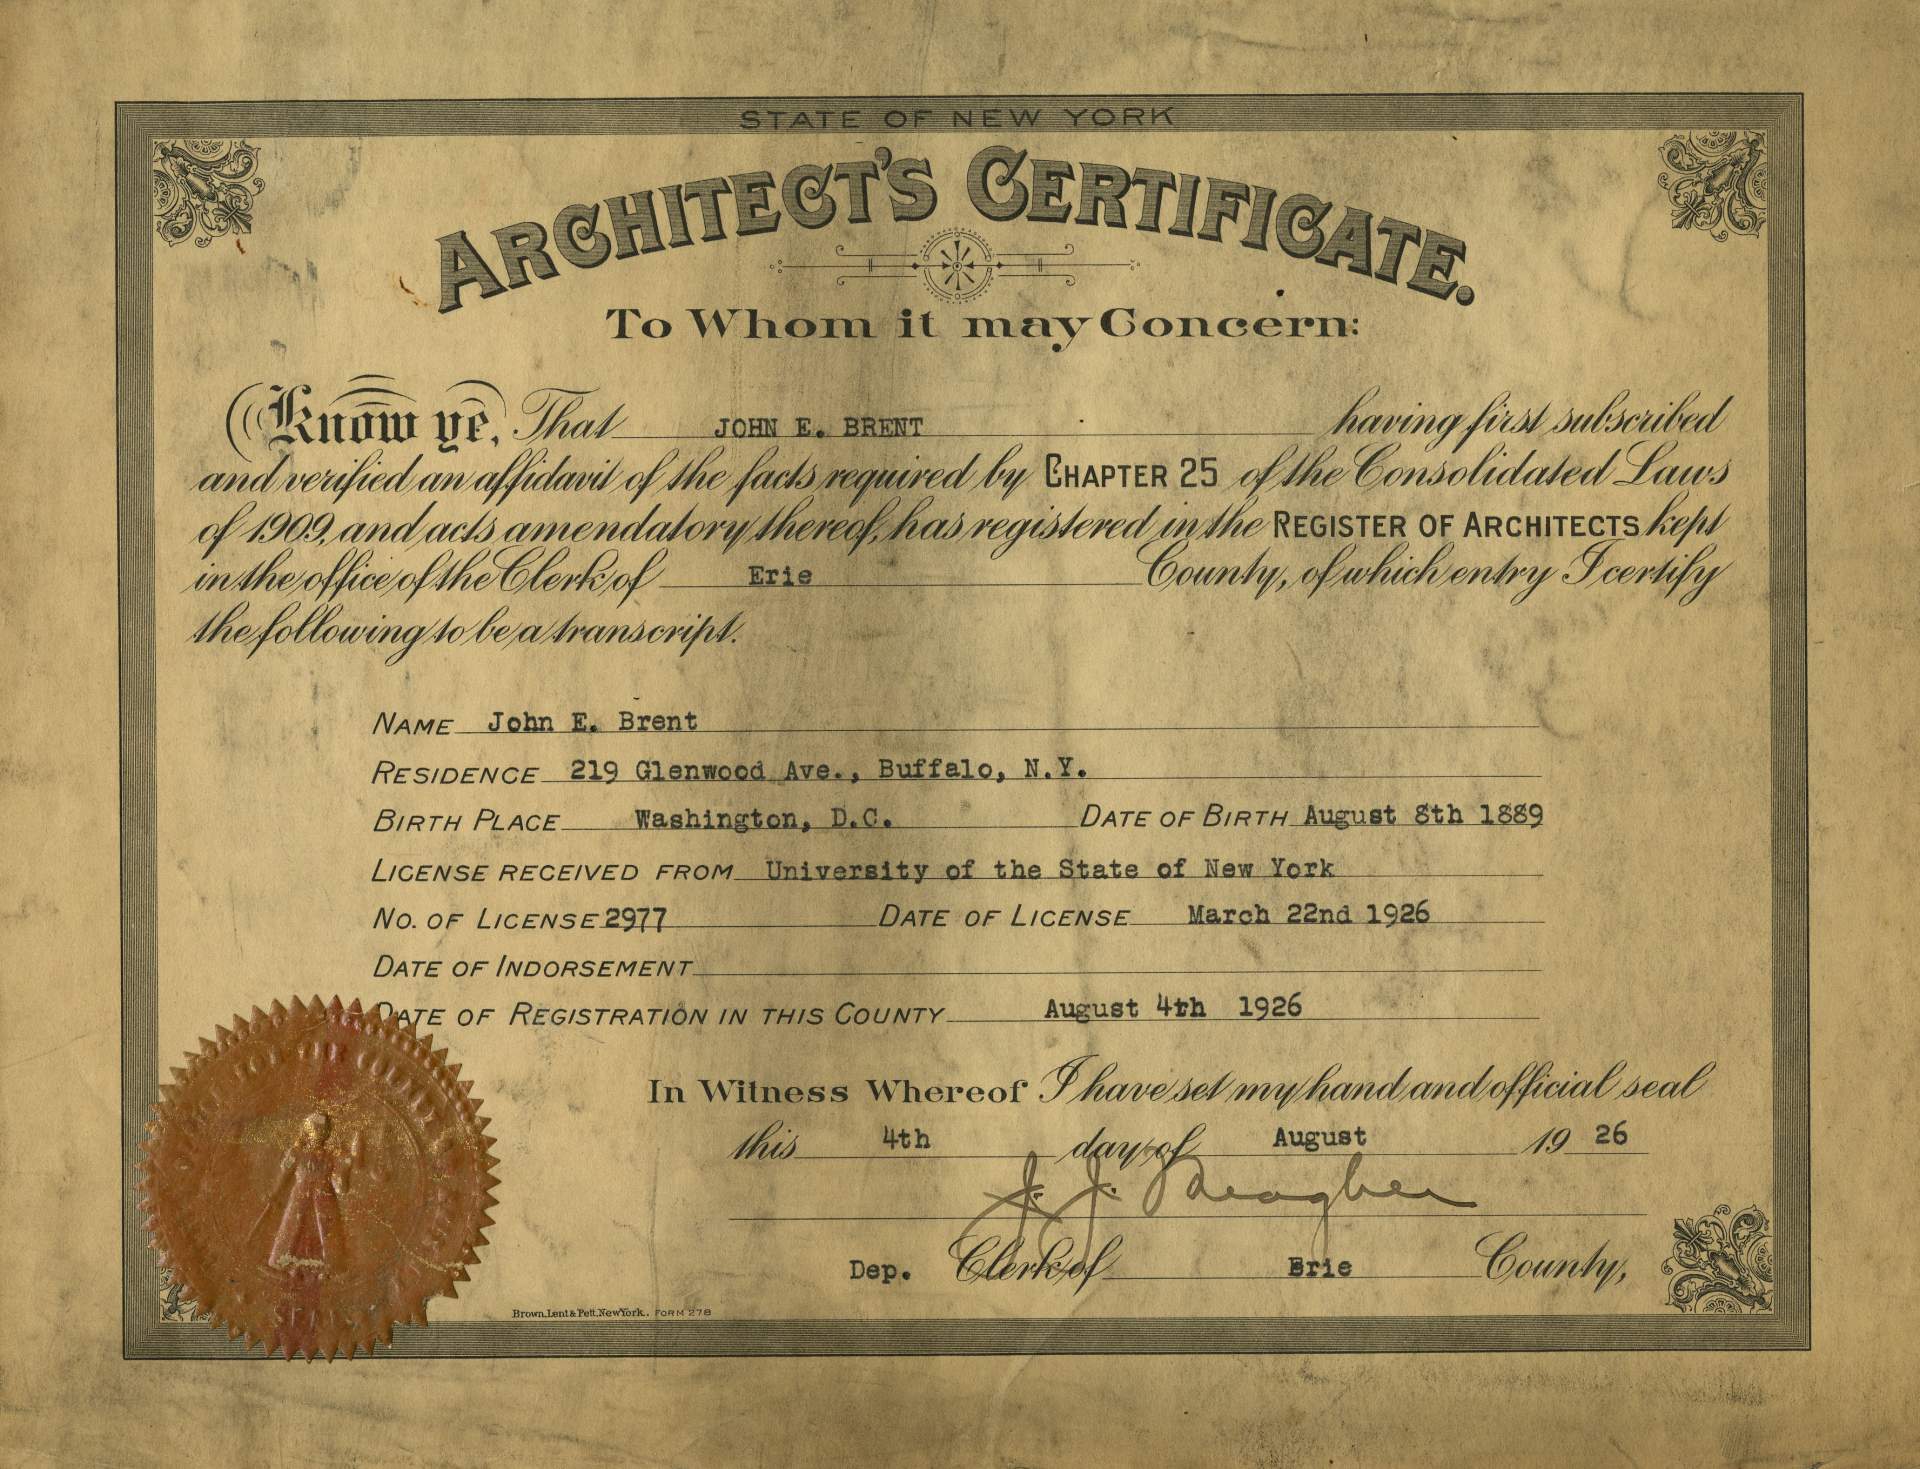 State of New York Architect’s Certificate